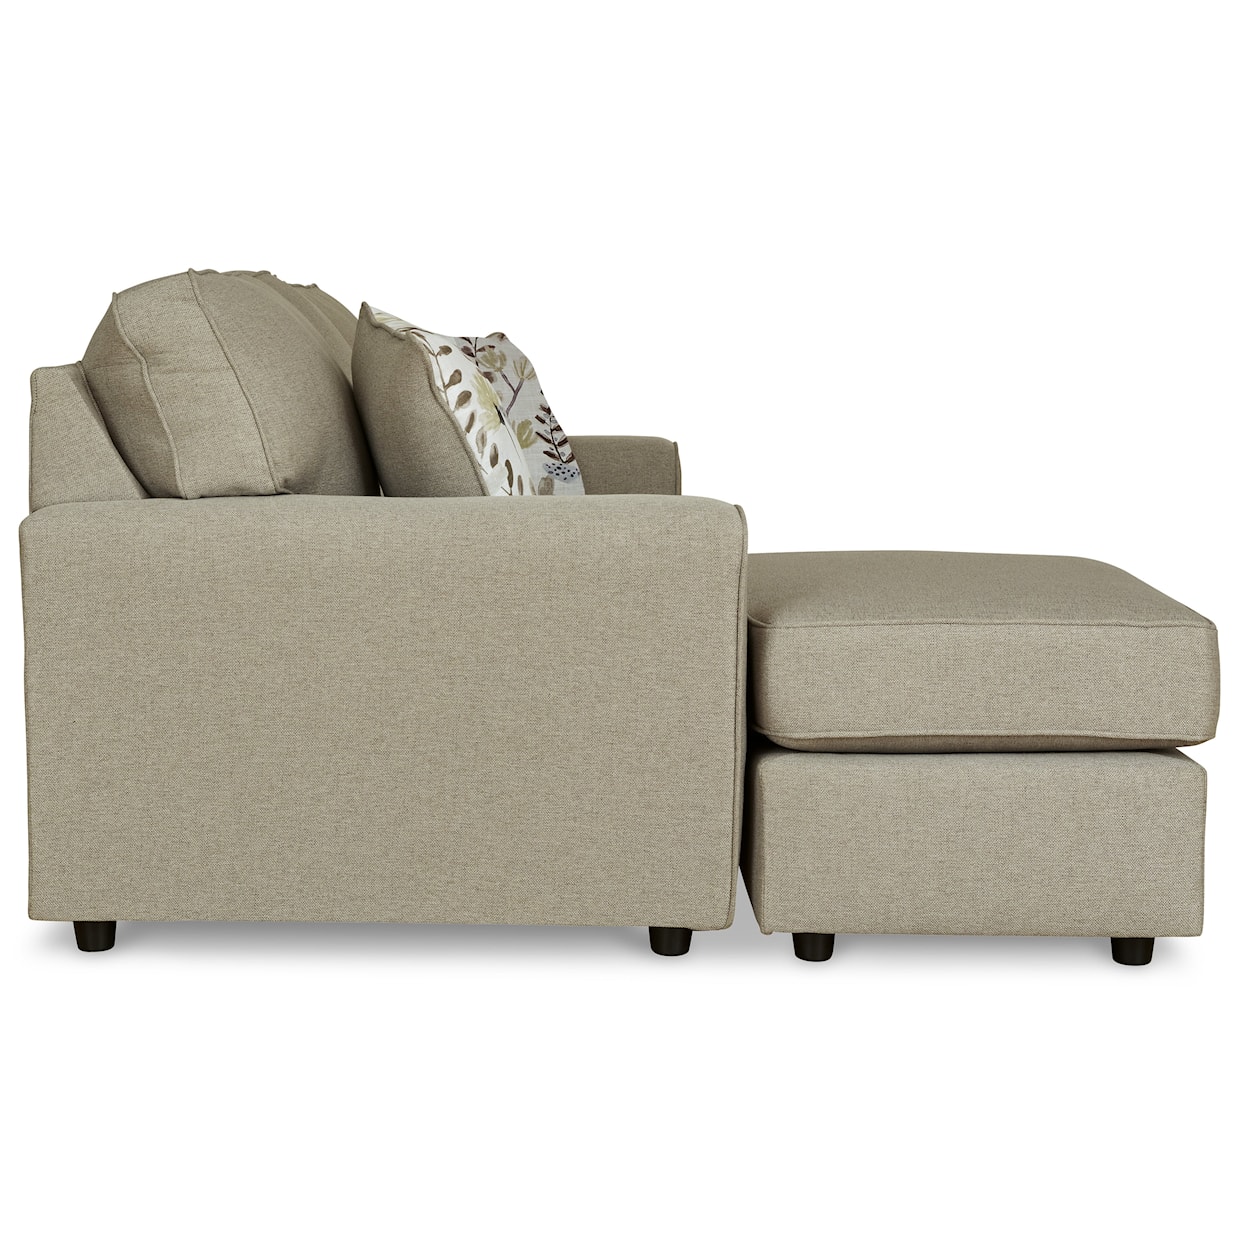 Signature Design by Ashley Renshaw Sofa Chaise